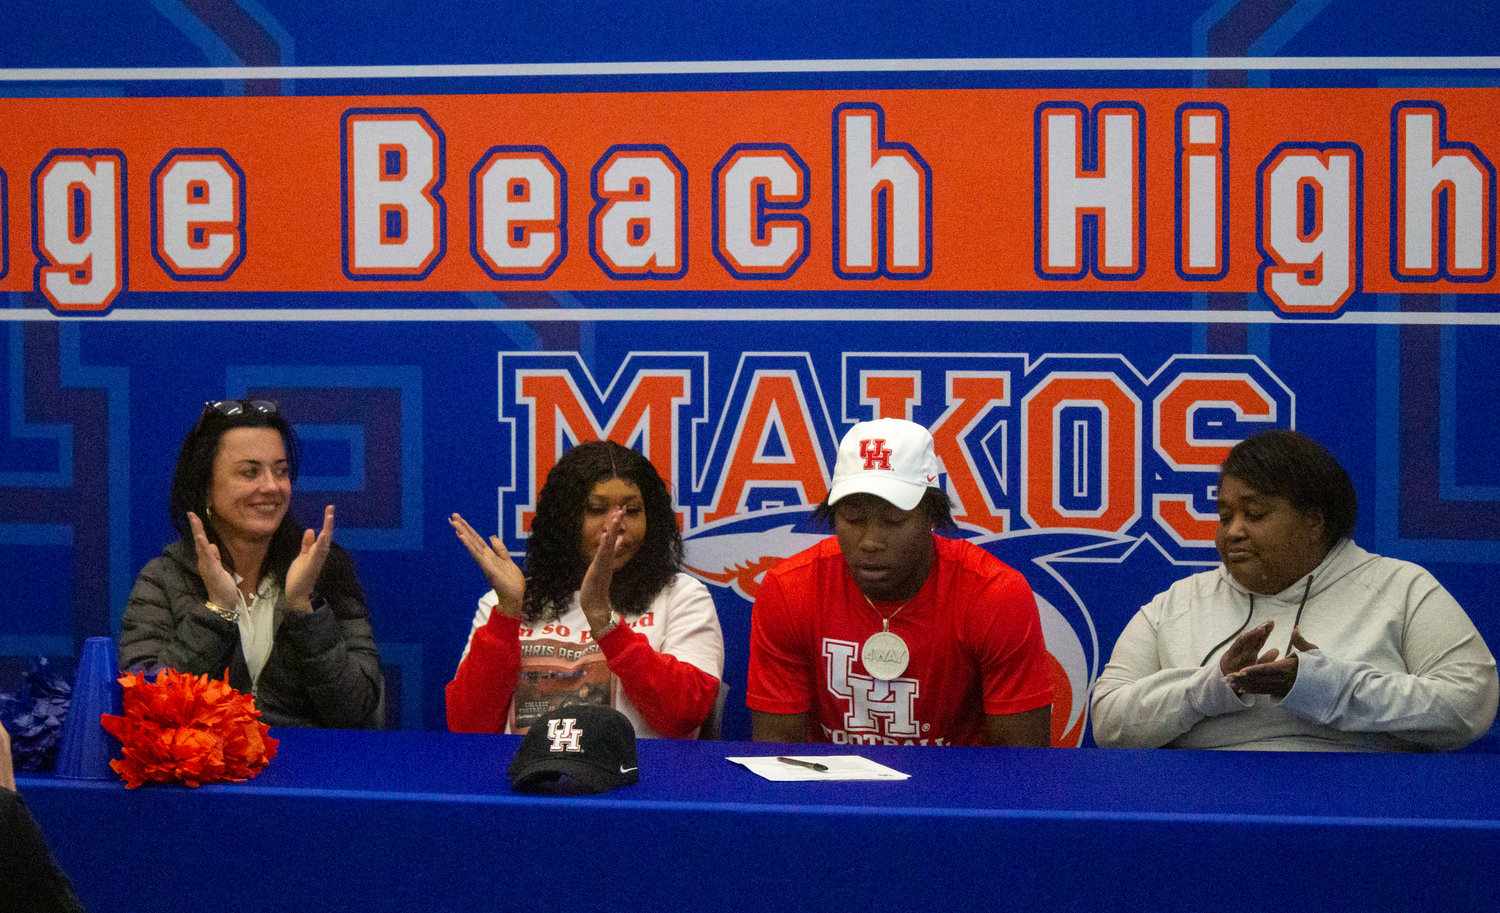 Chris Pearson was joined by family in putting pen to paper to cement his pledge to the University of Houston football team Wednesday, Dec. 21, as part of National Signing Day.